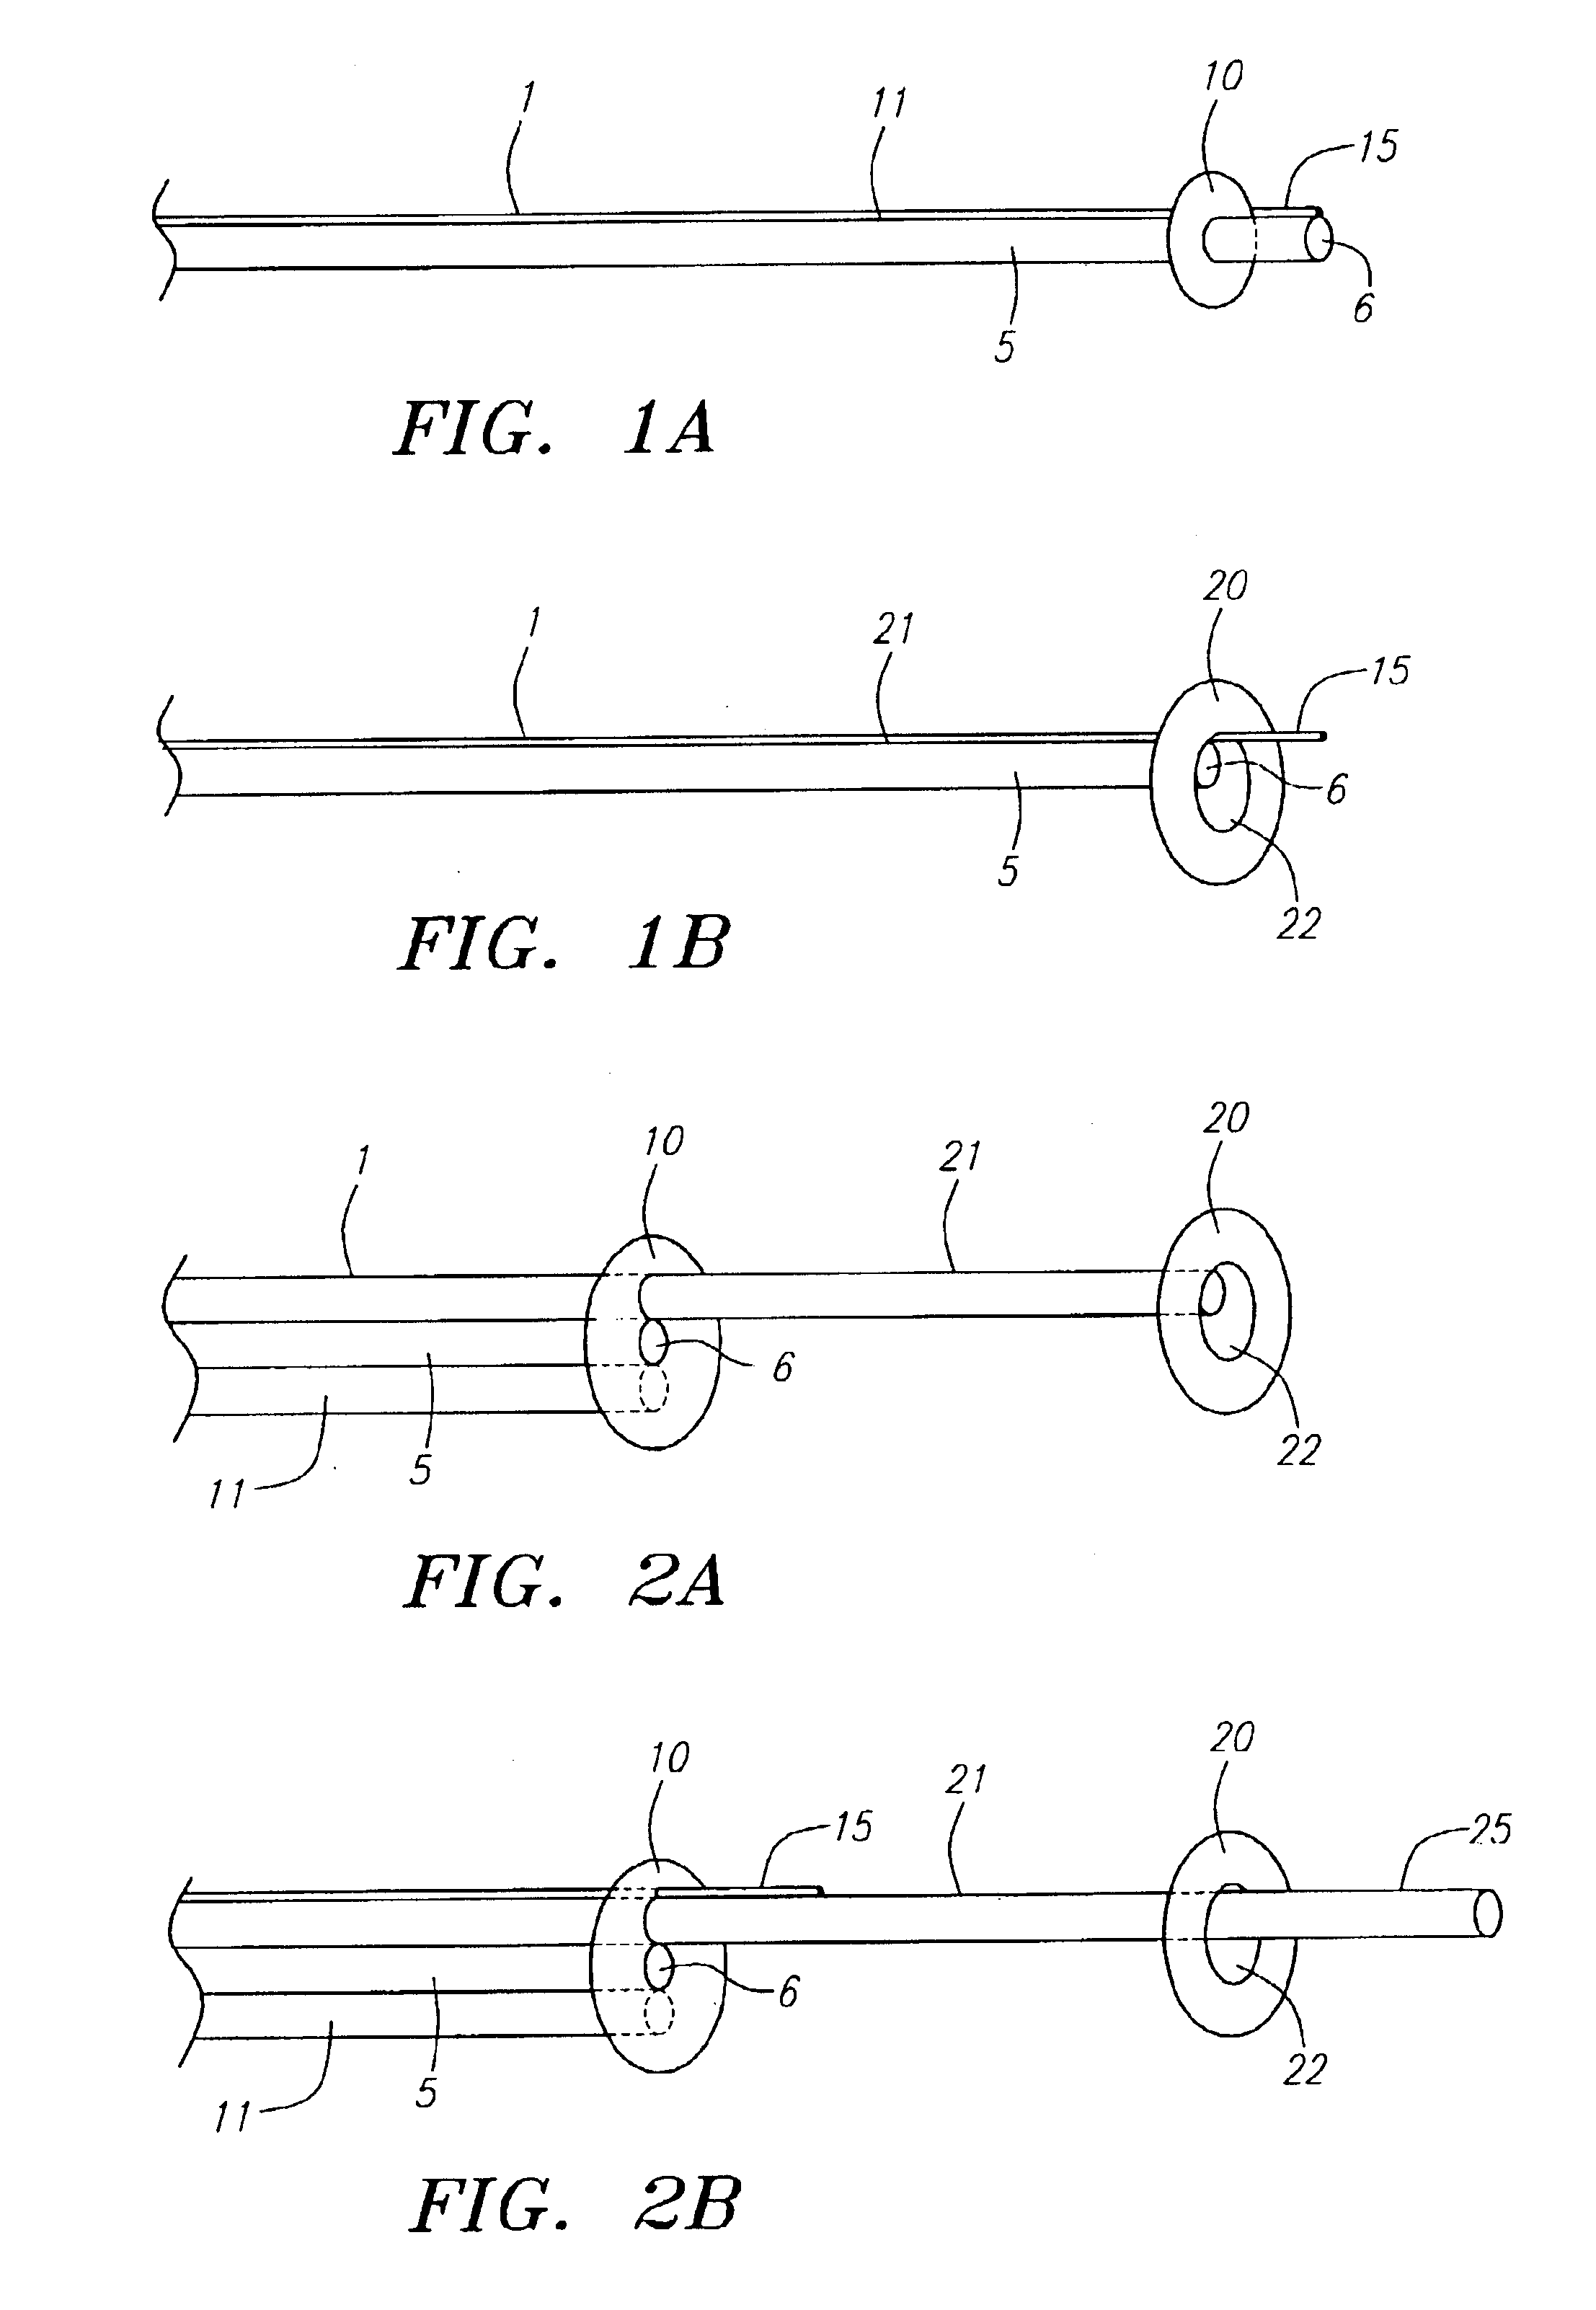 Devices and methods for preventing distal embolization using flow reversal in arteries having collateral blood flow